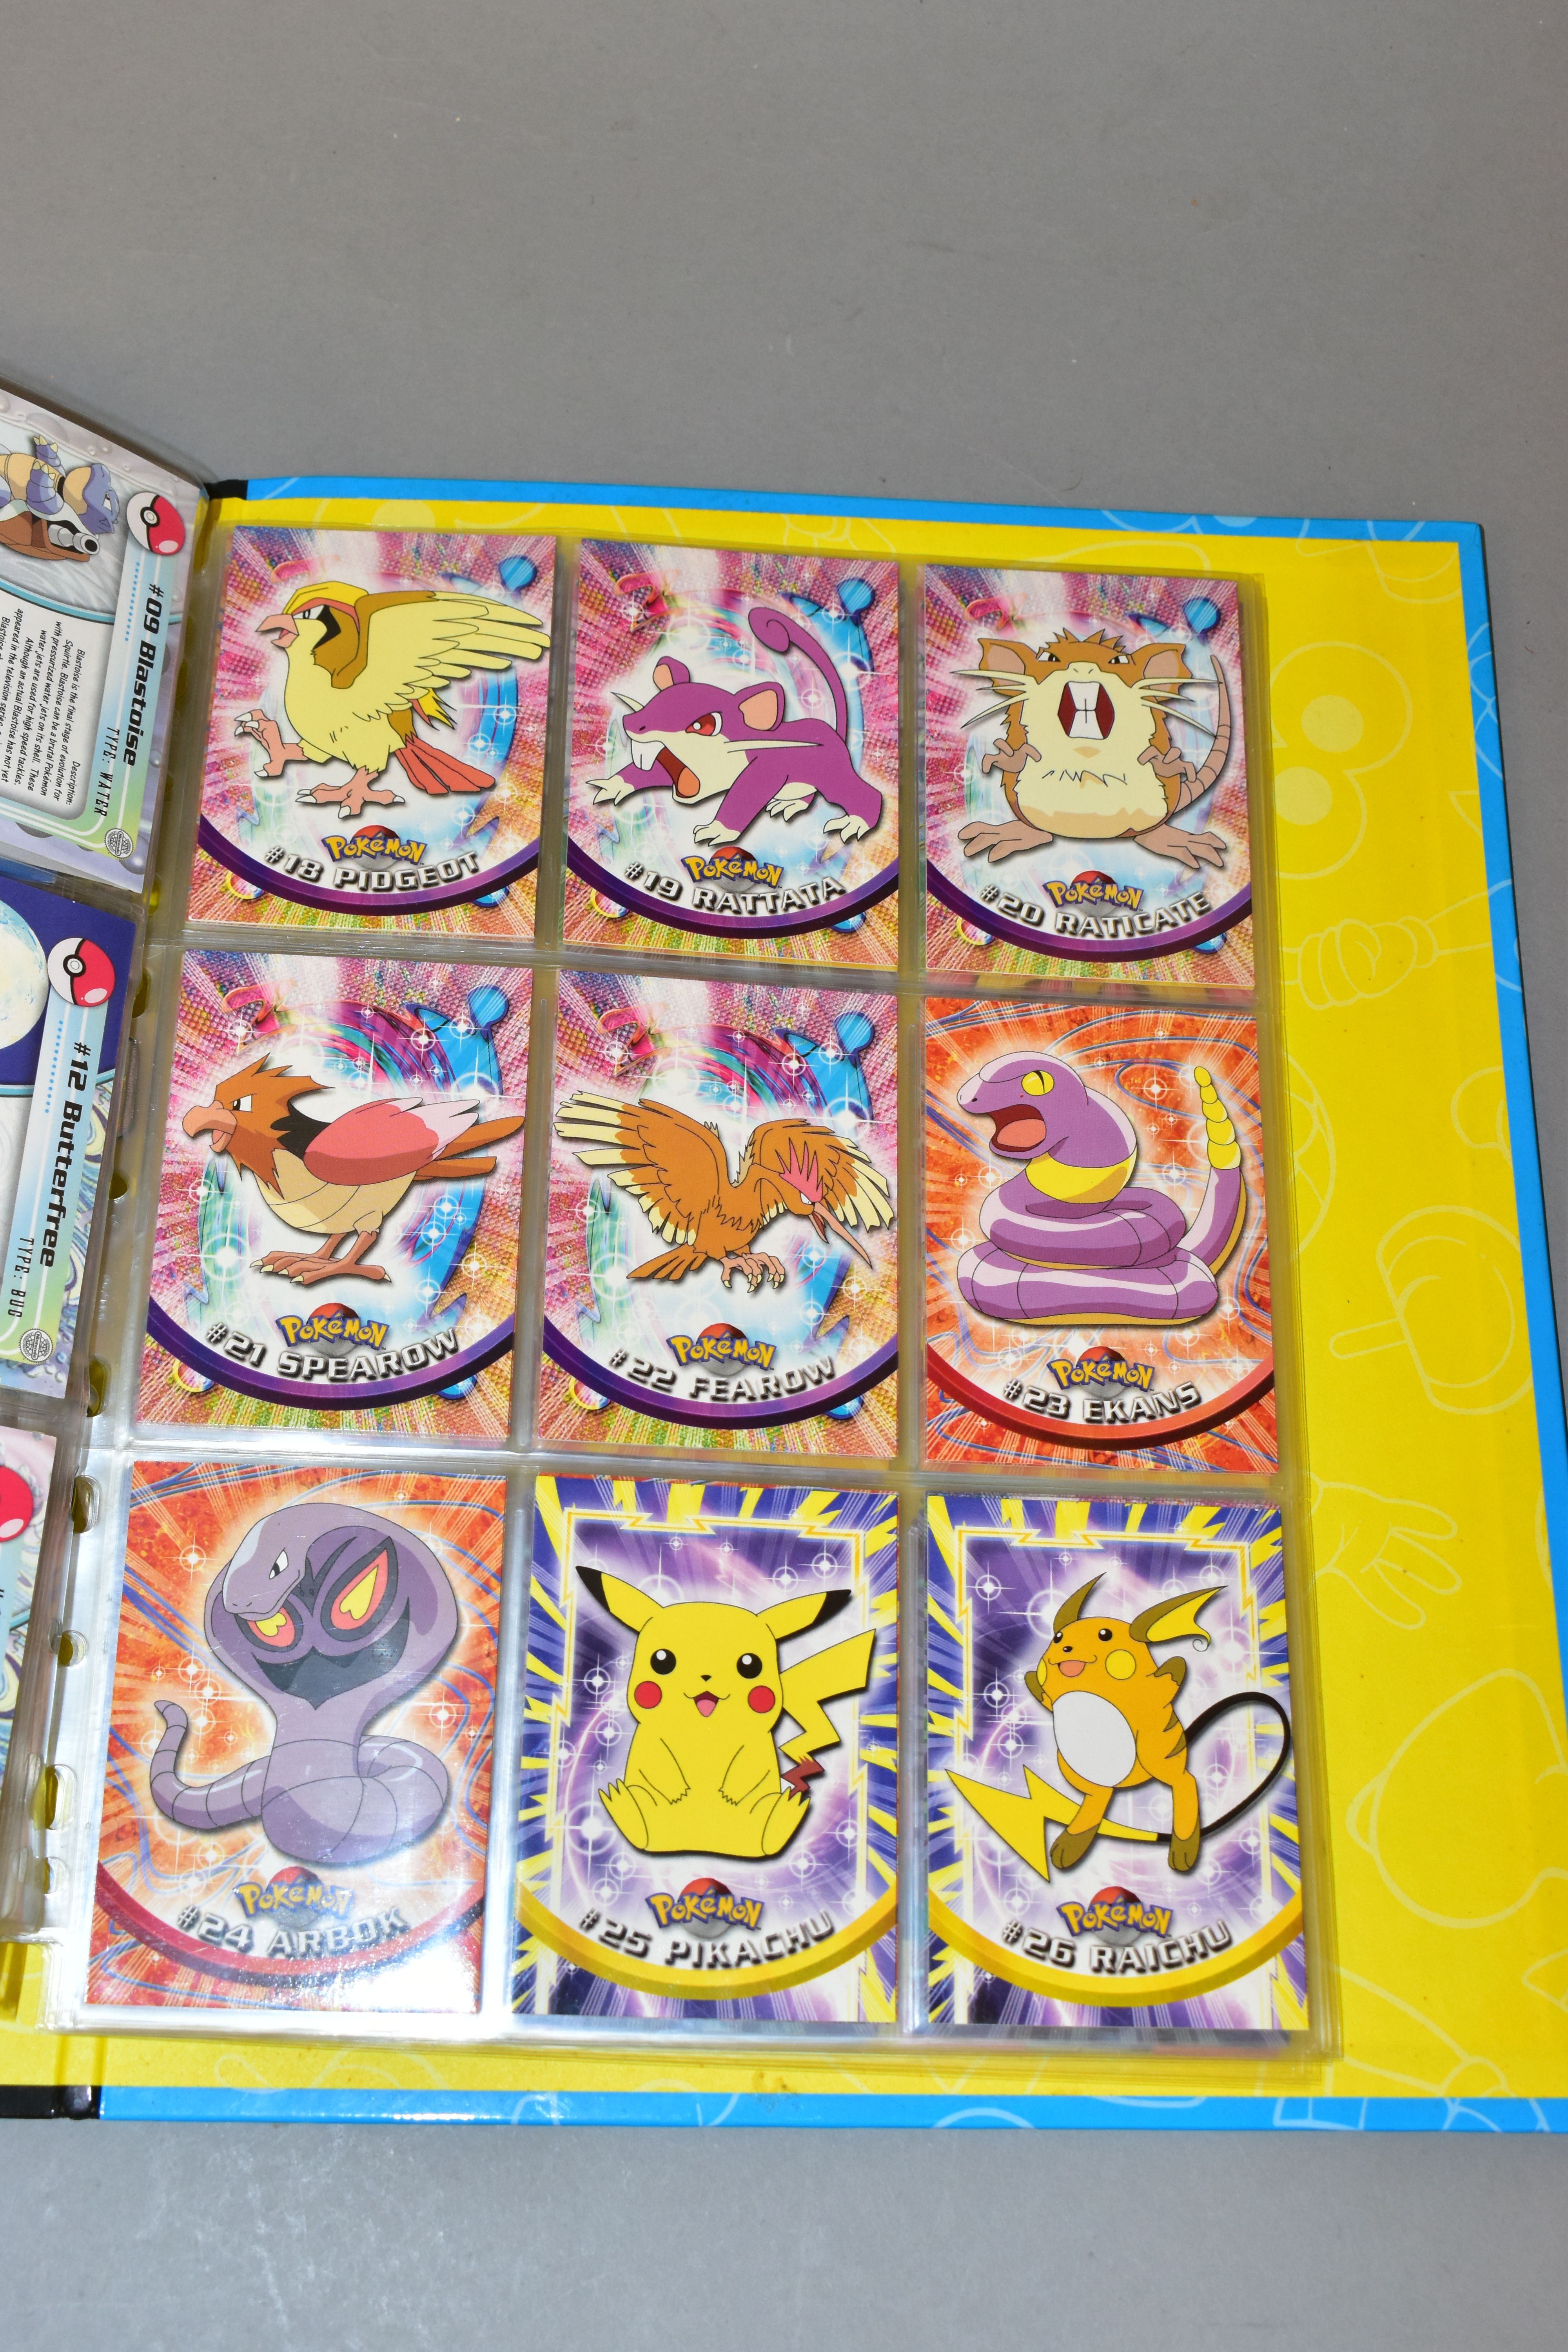 A COMPLETE SET OF THE TOPPS POKEMON TRADING CARDS SERIES 1, all 76 cards plus the 13 character cards - Image 14 of 20